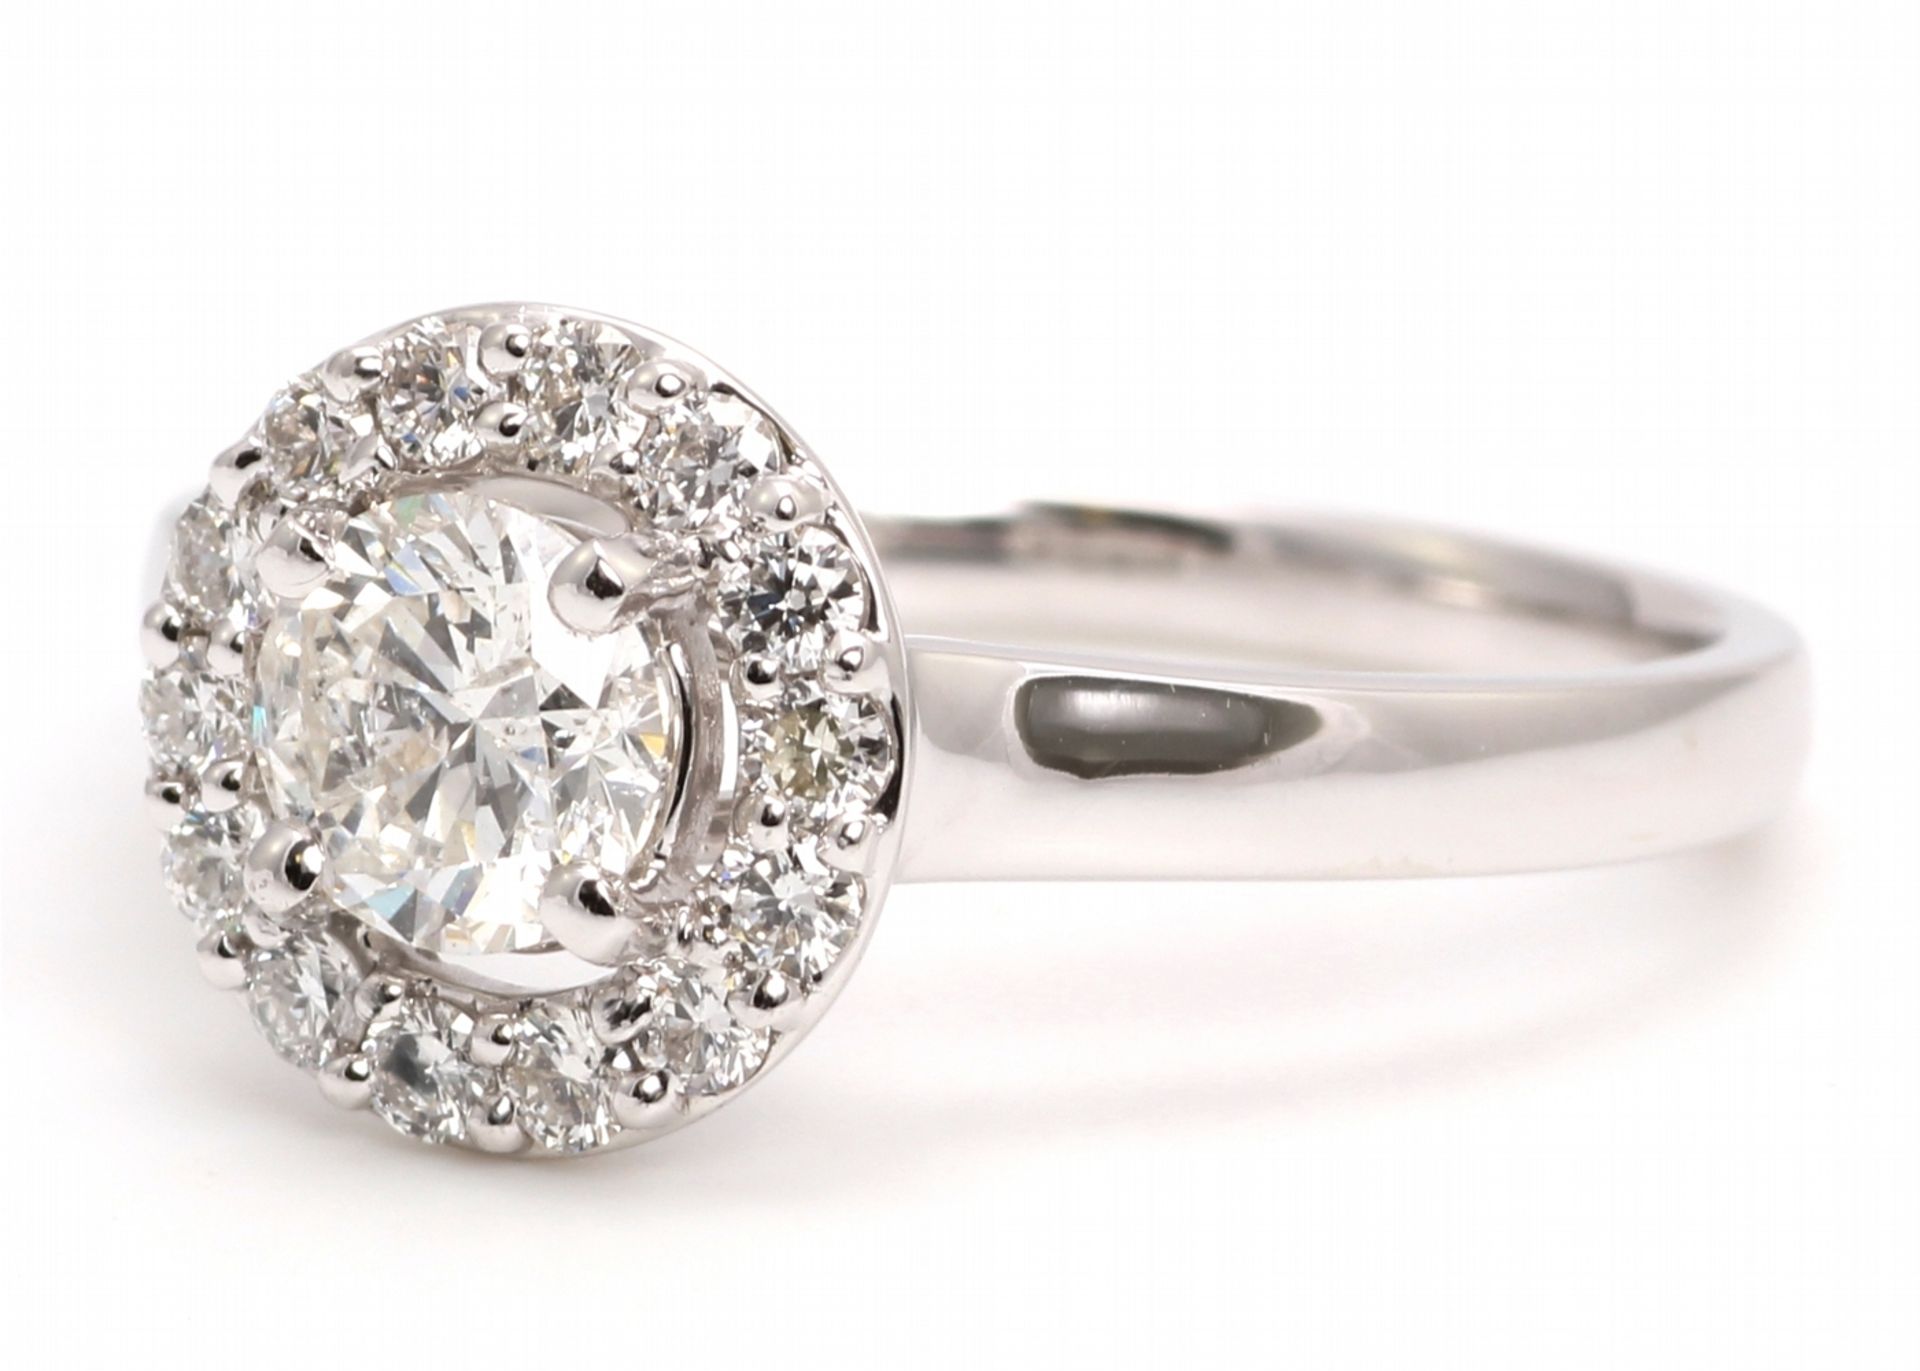 18ct White Gold Single Stone With Halo Setting Ring (0.58) 0.86 Carats - Valued by GIE £10,925. - Image 2 of 9